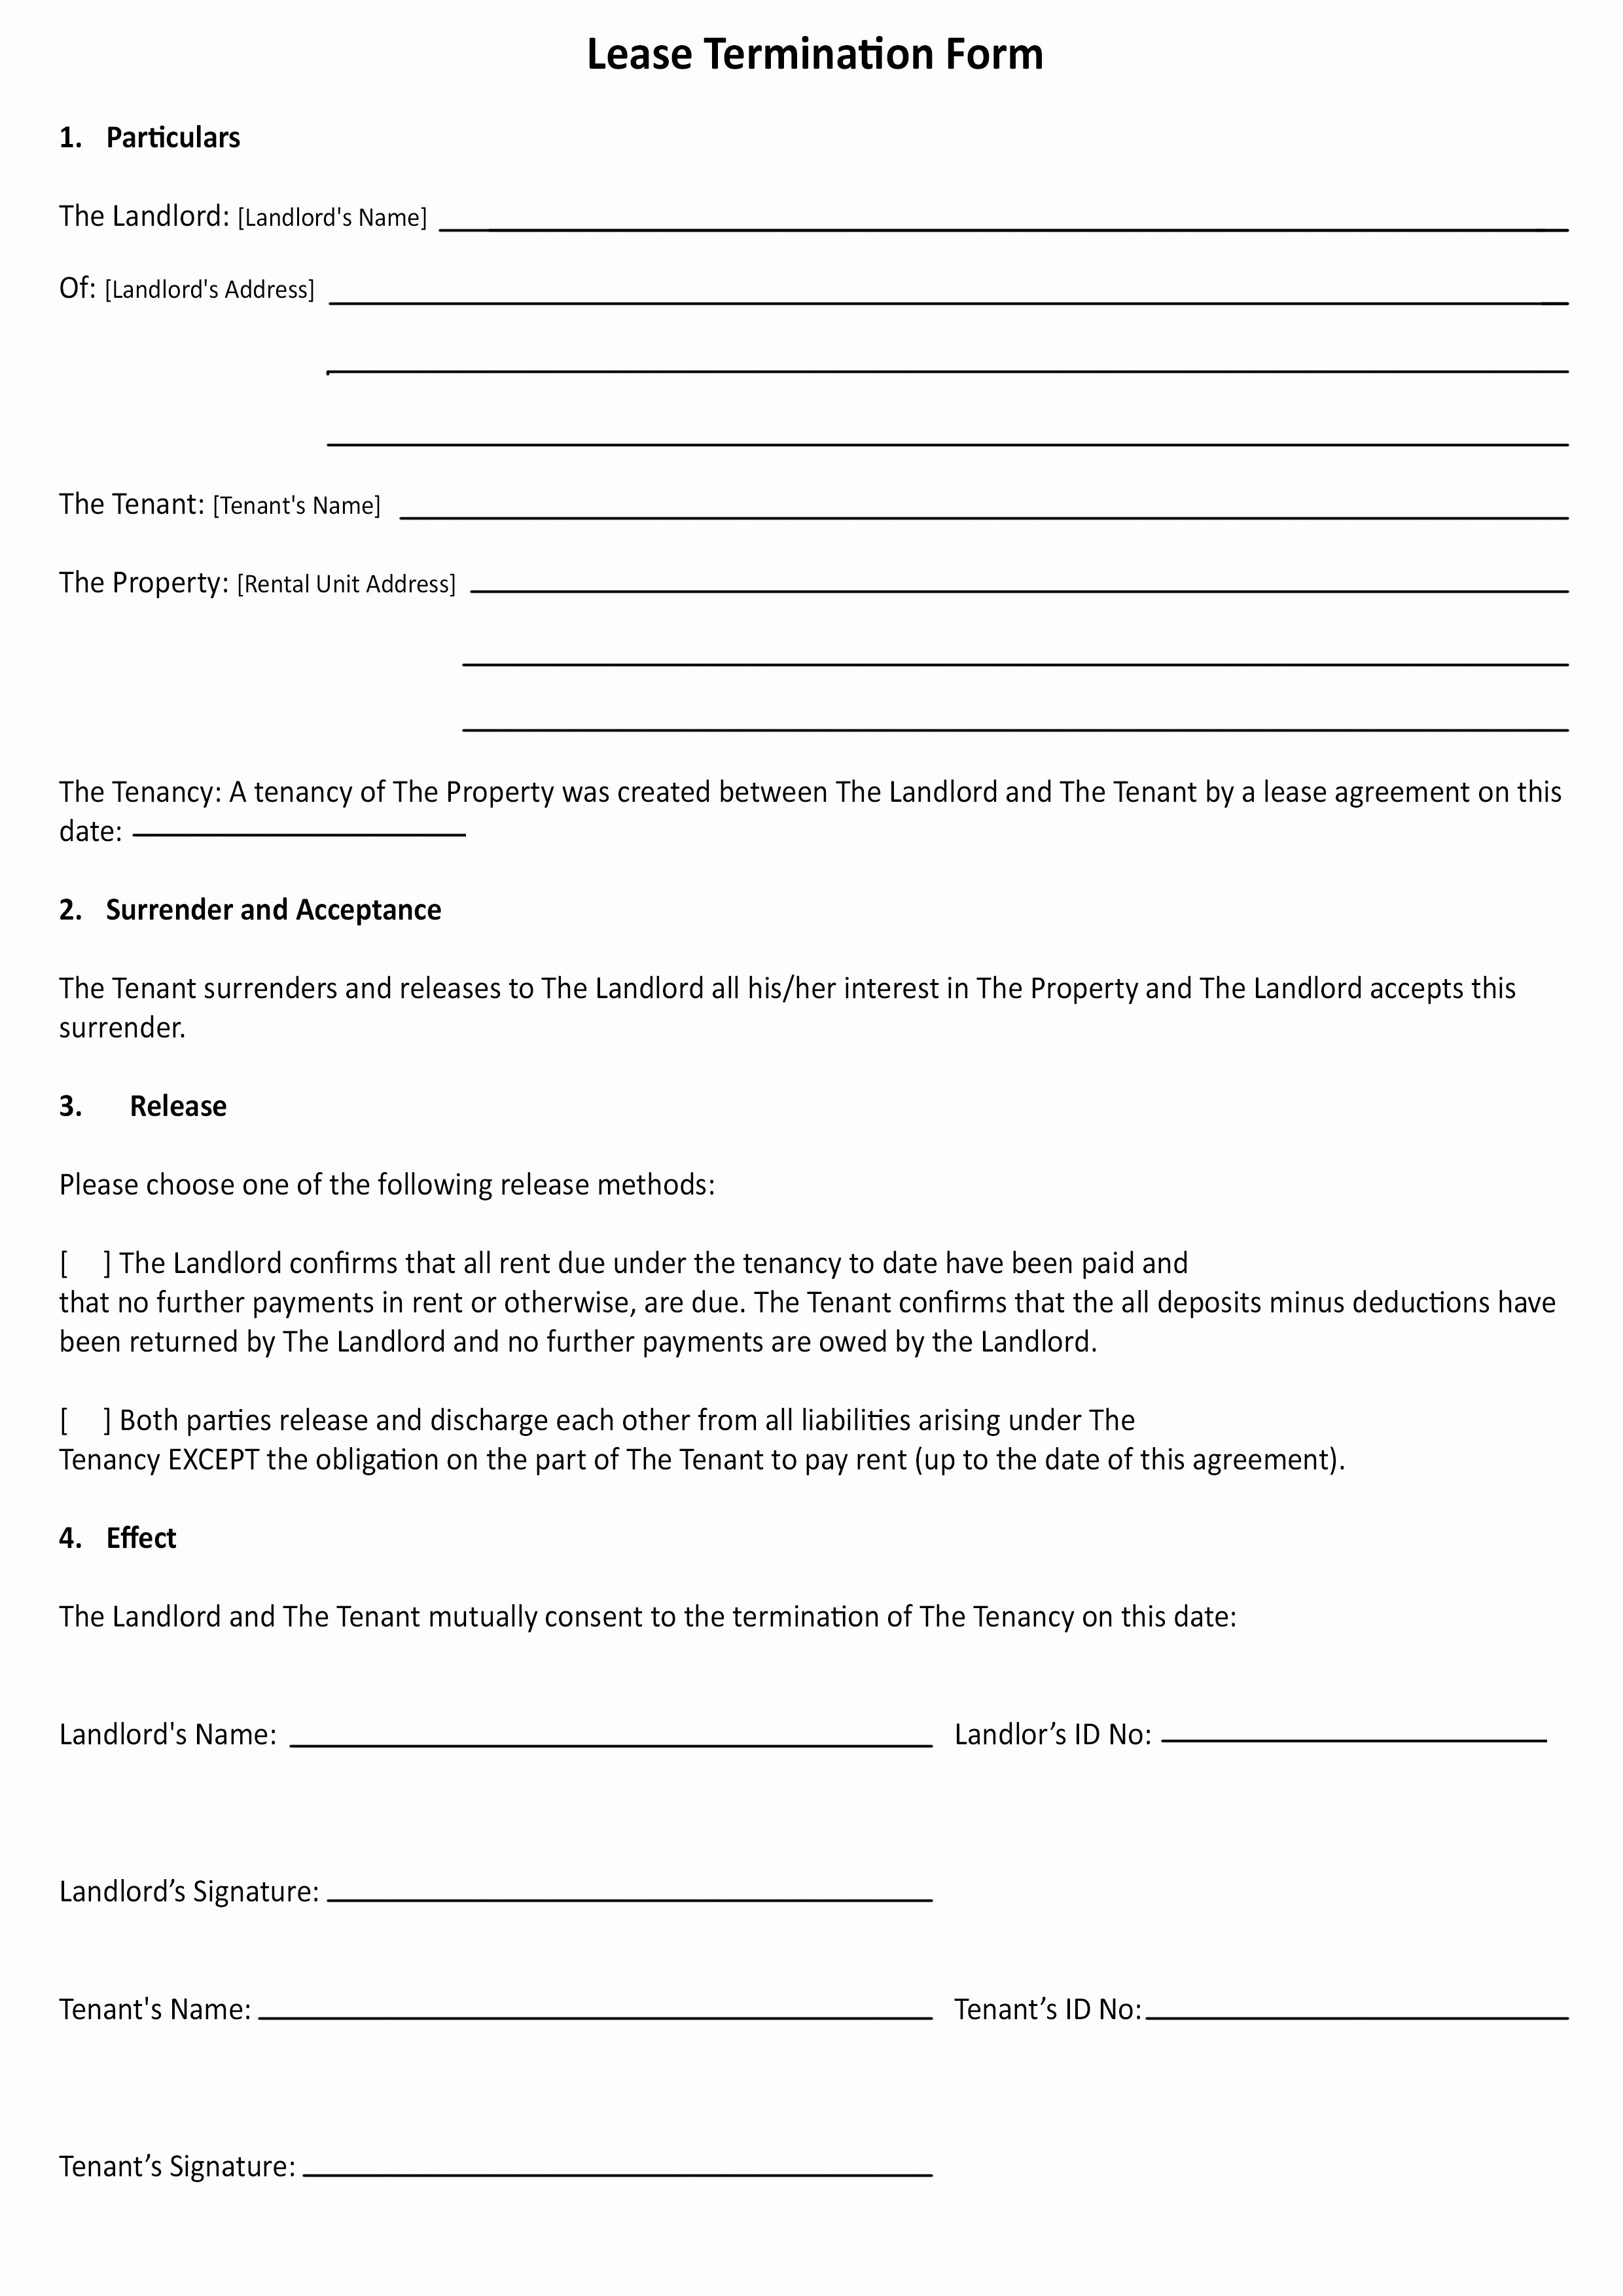 Form Lease Termination form